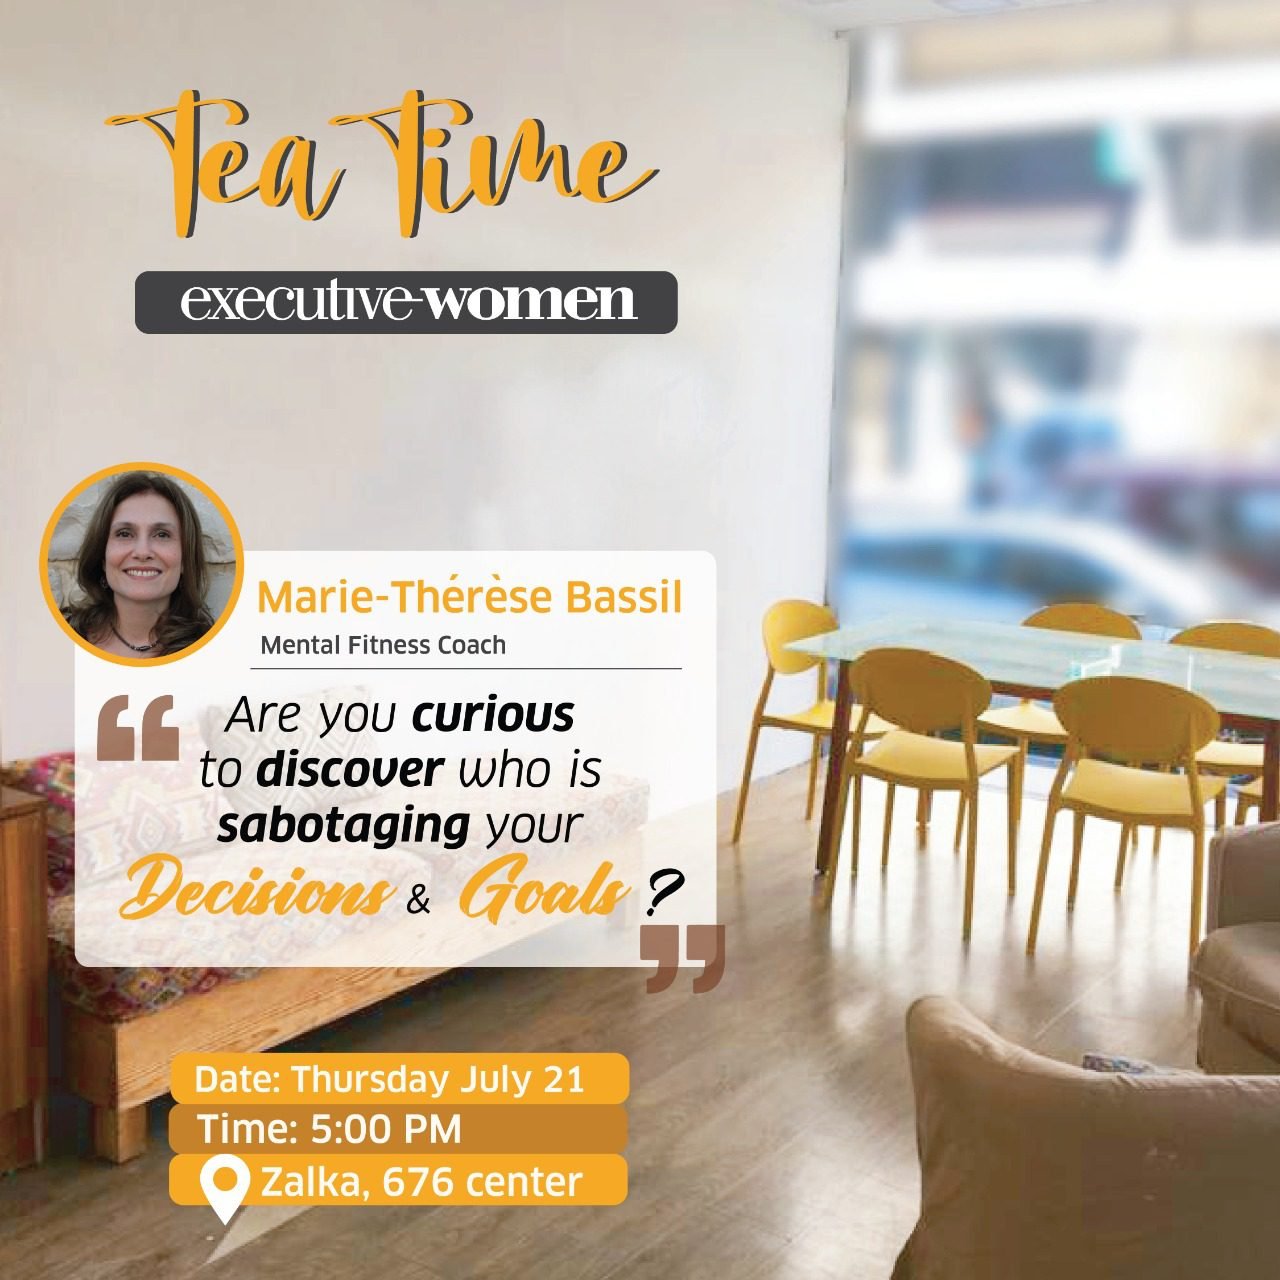 Tea Time with Marie-Therese Bassil